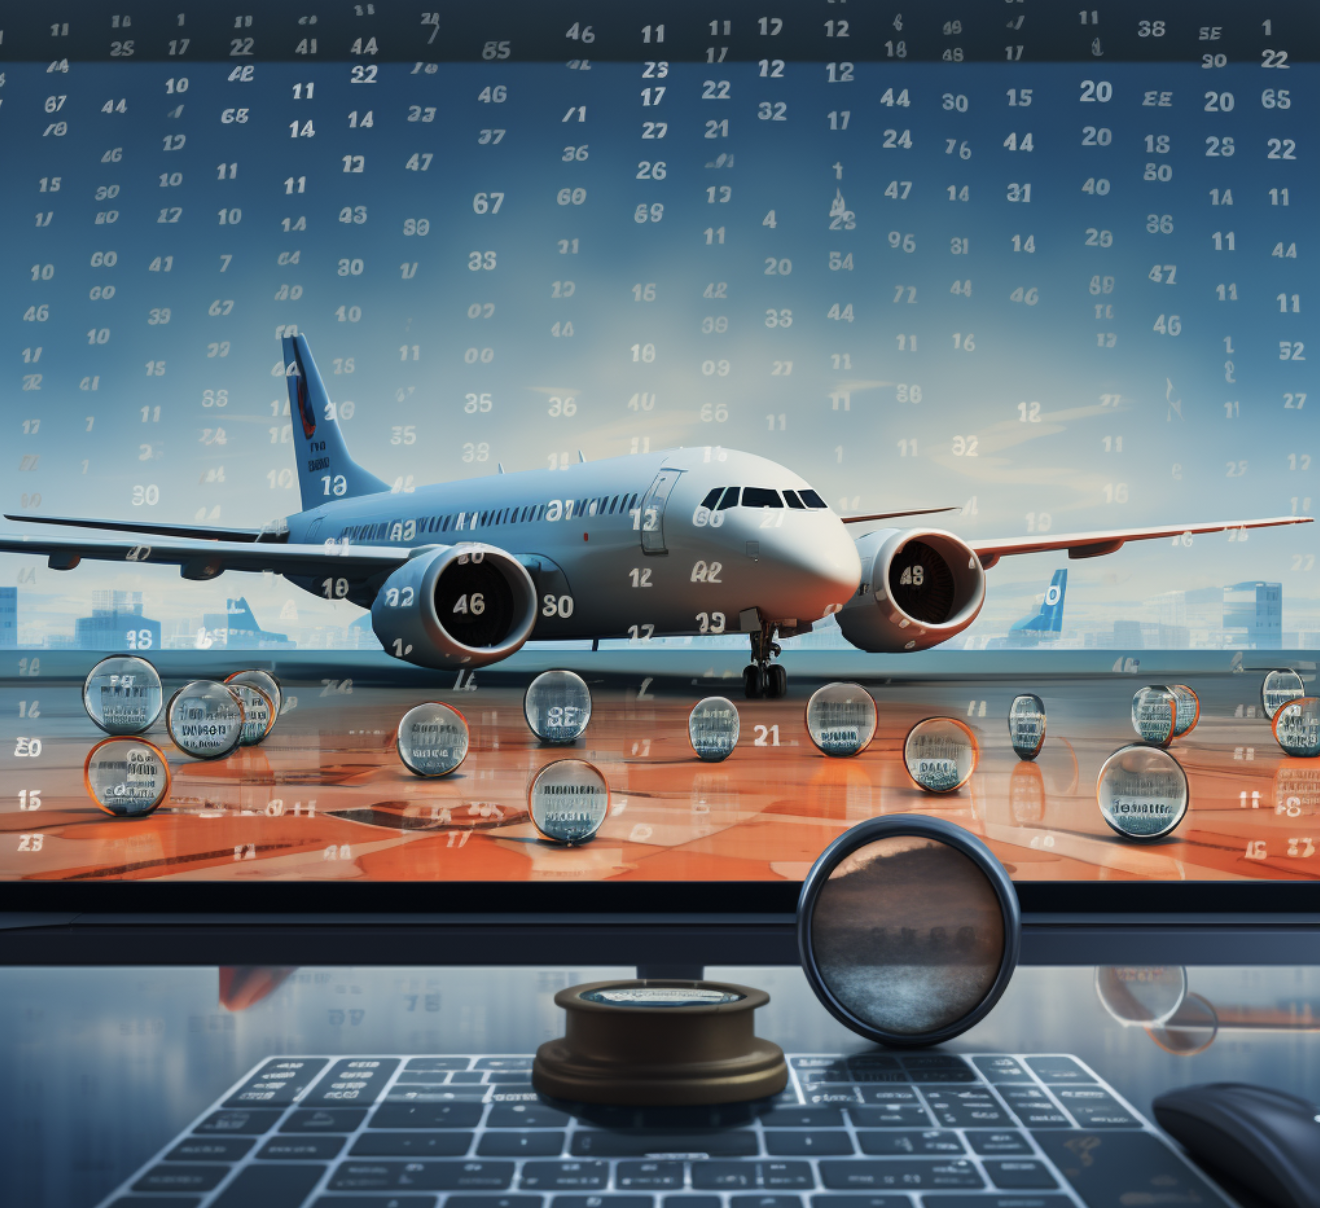 How Airlines Use Proxies To Research Competitor Pricing Data - ProxyEmpire